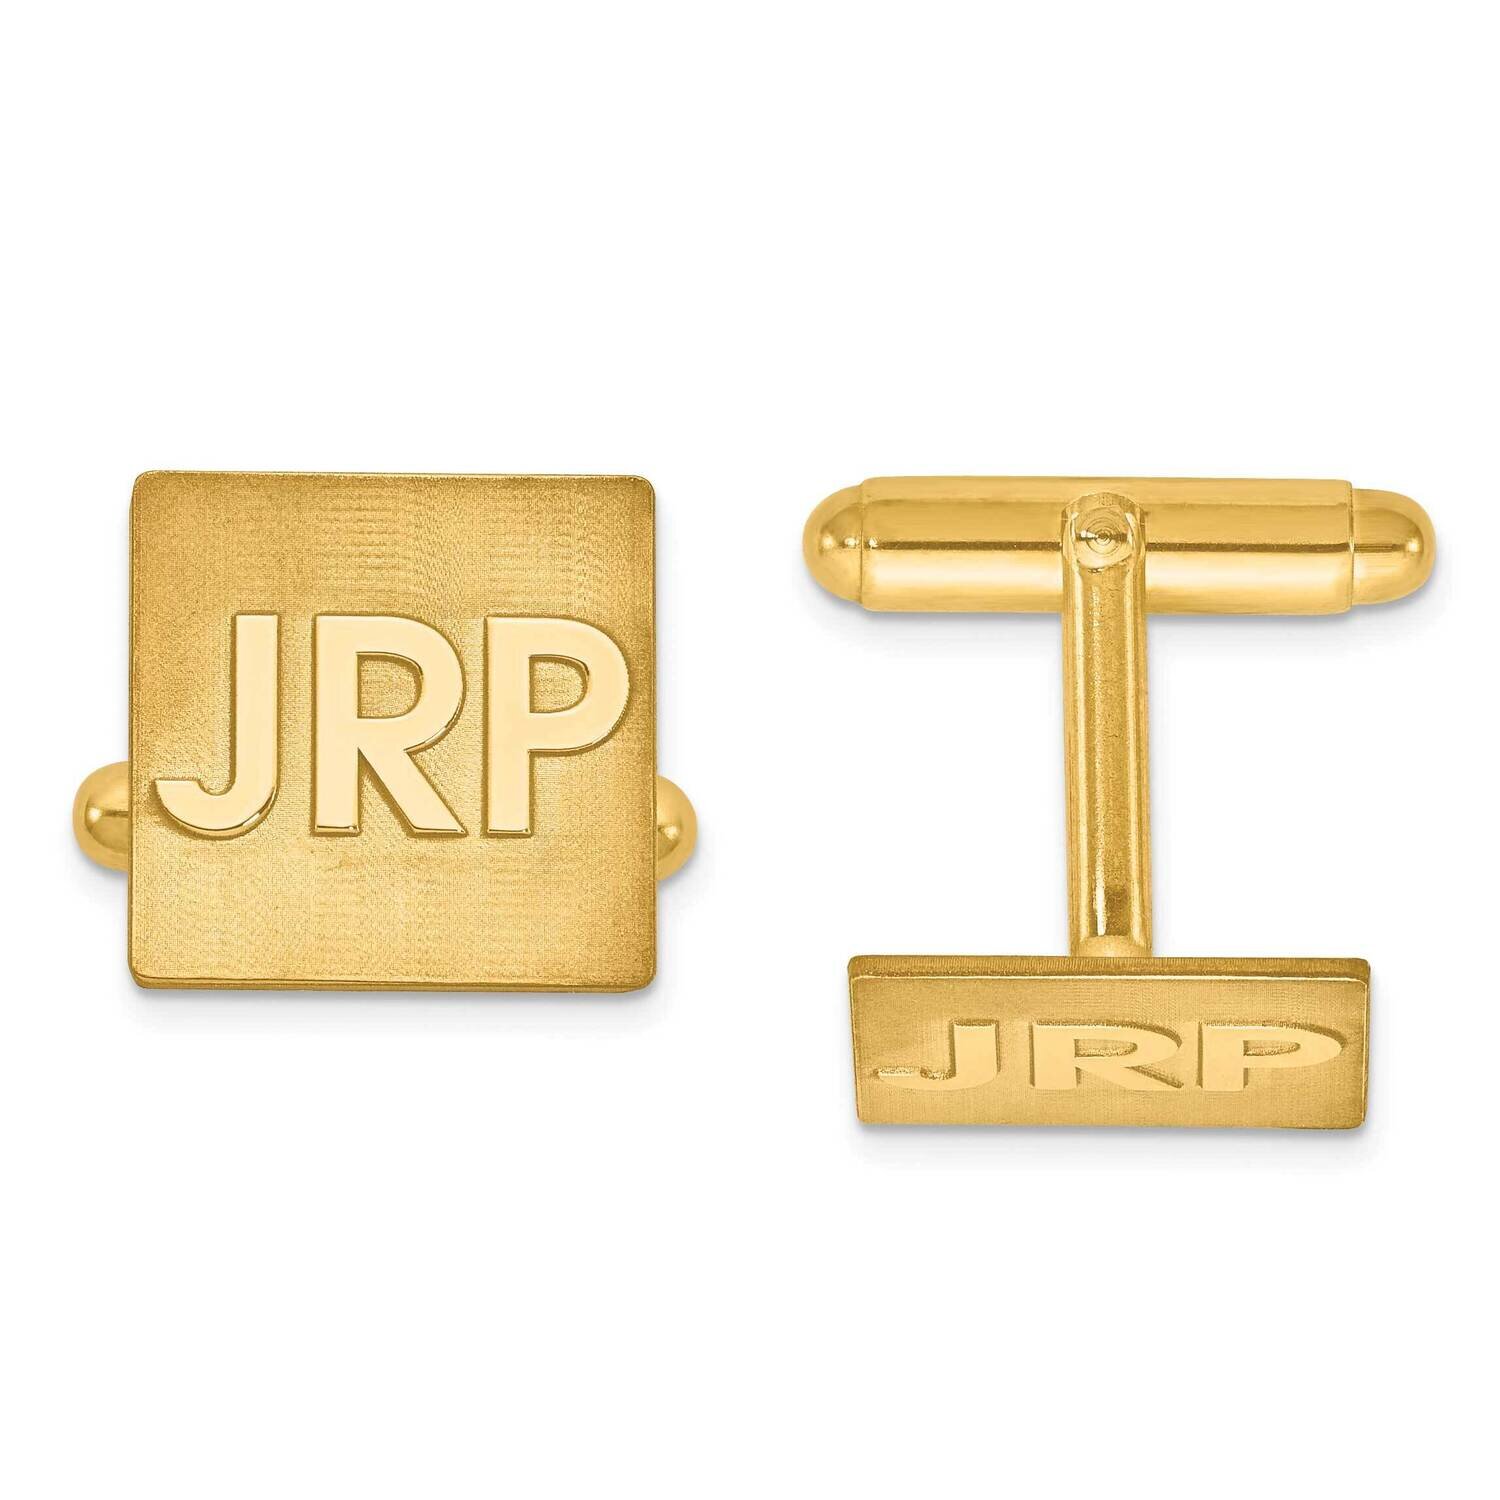 Raised Letters Square Monogram Cuff Links Gold-plated Silver XNA612GP